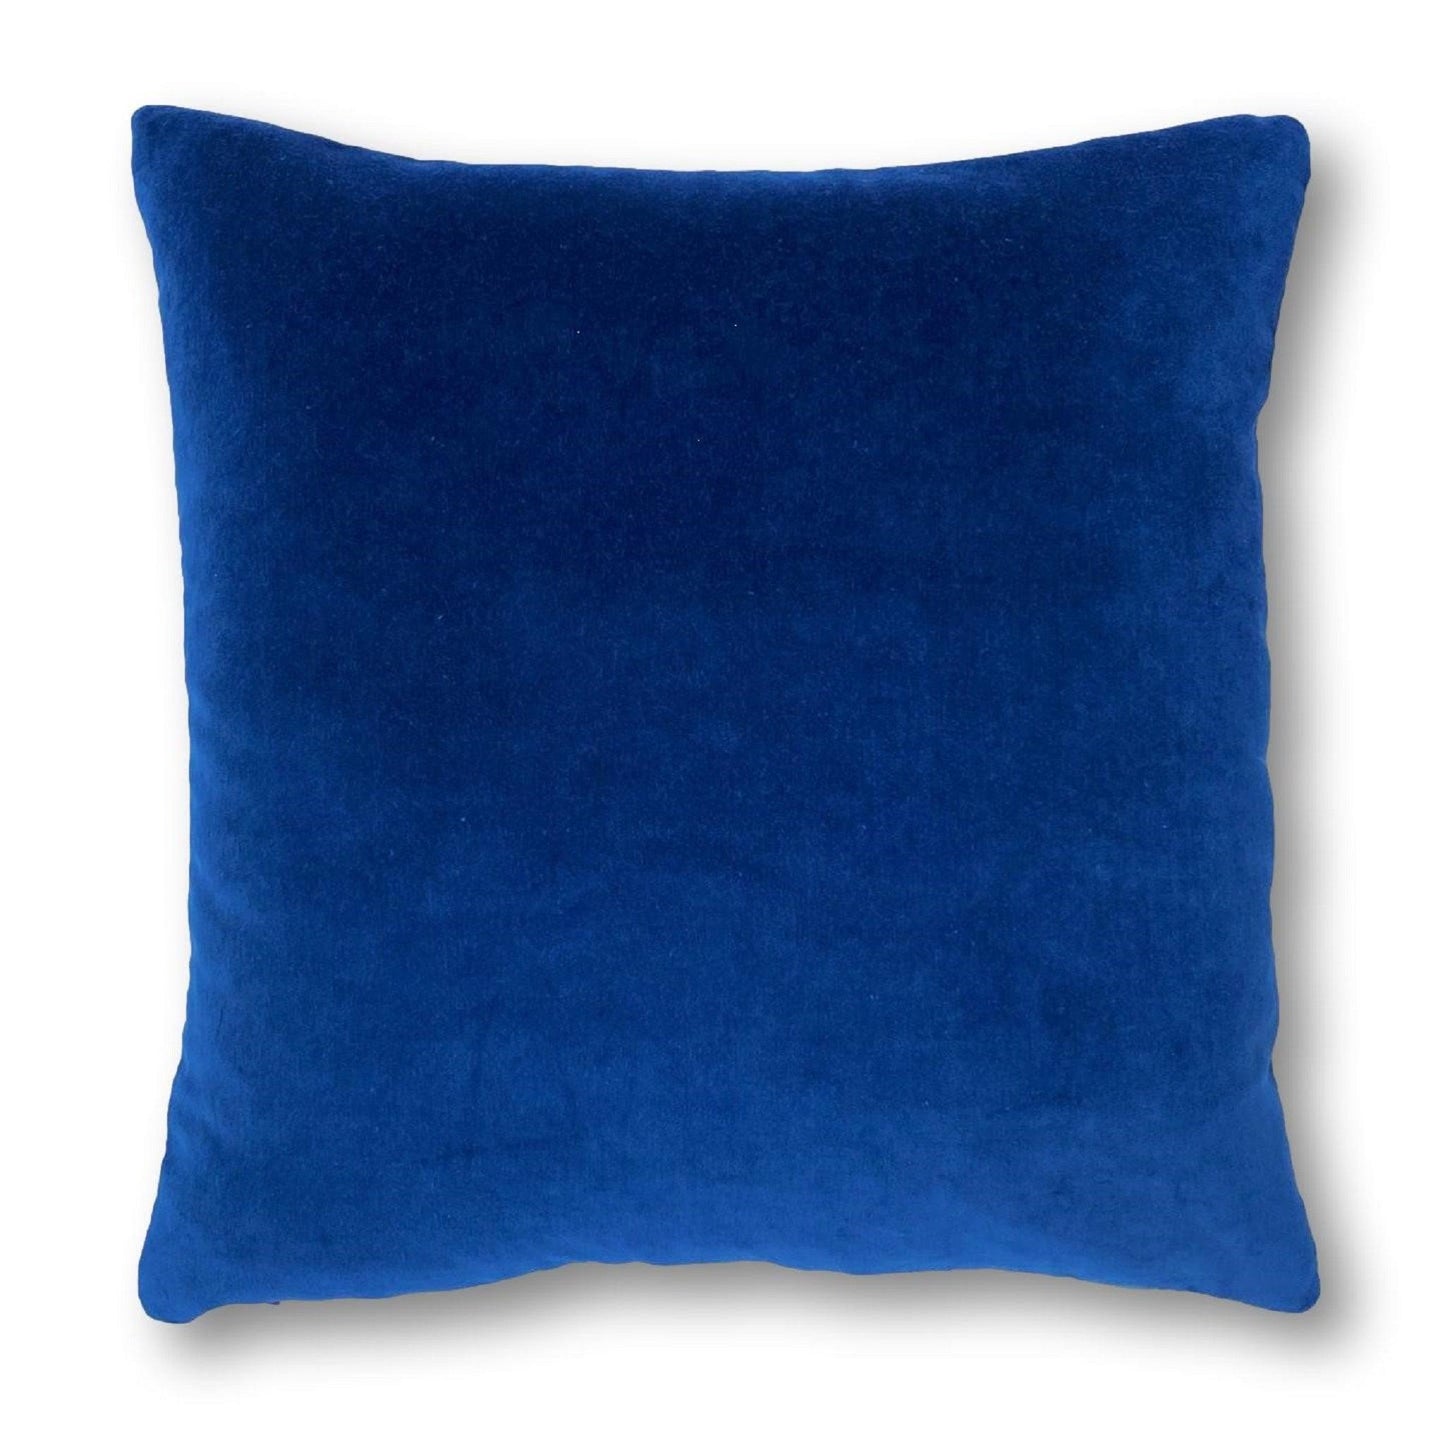 orange and blue cushions luxe 39